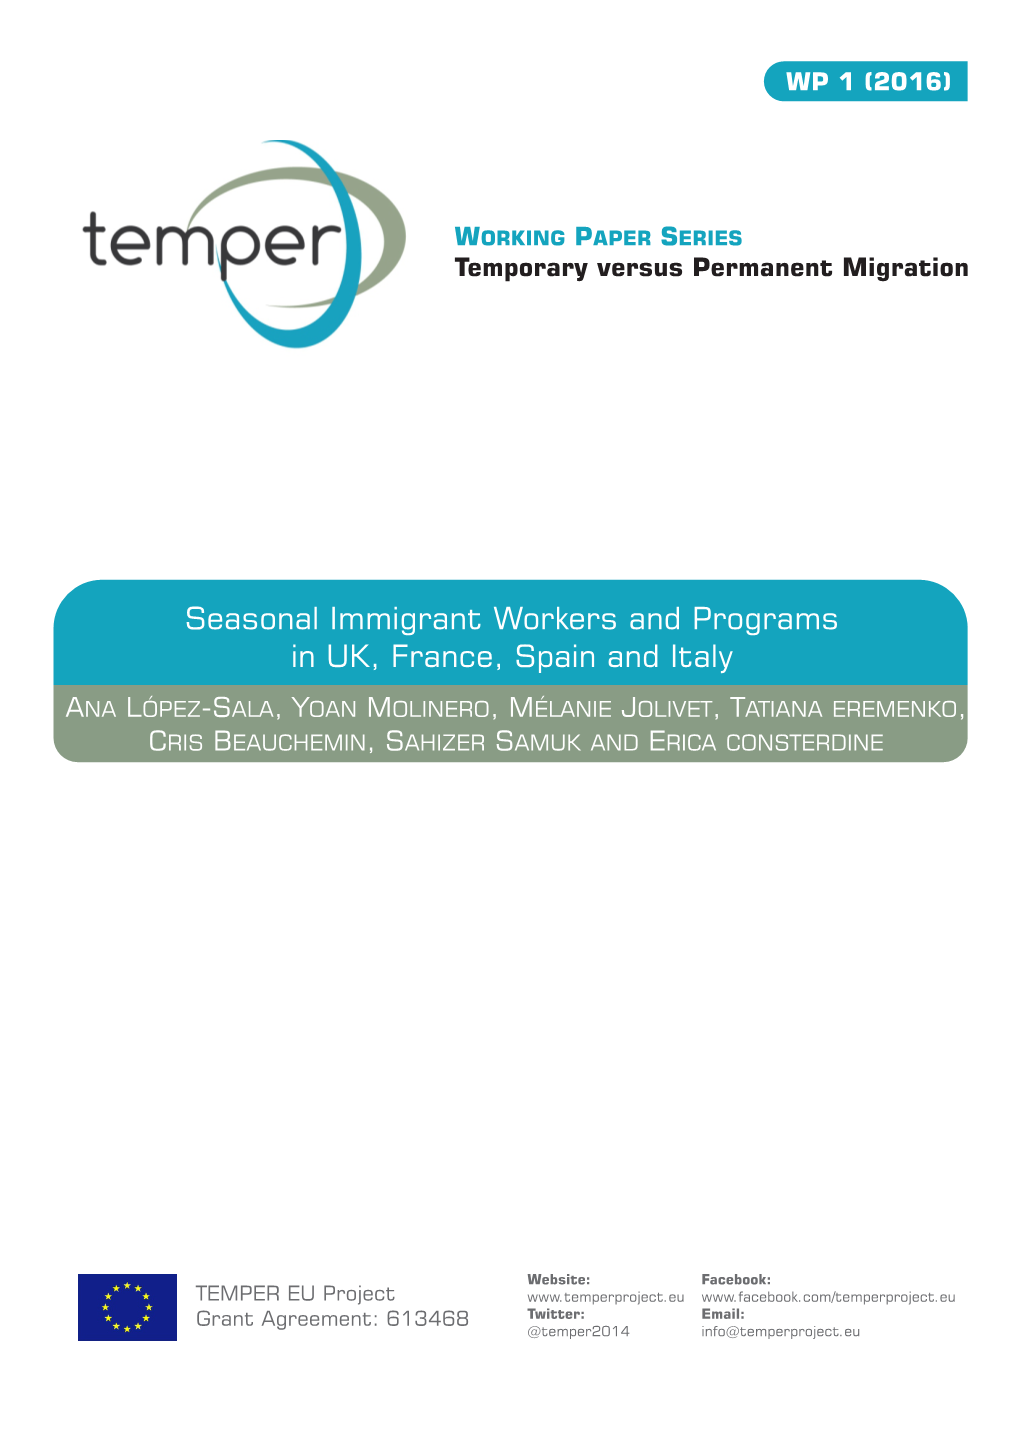 Seasonal Immigrant Workers and Programs in UK, France, Spain and Italy